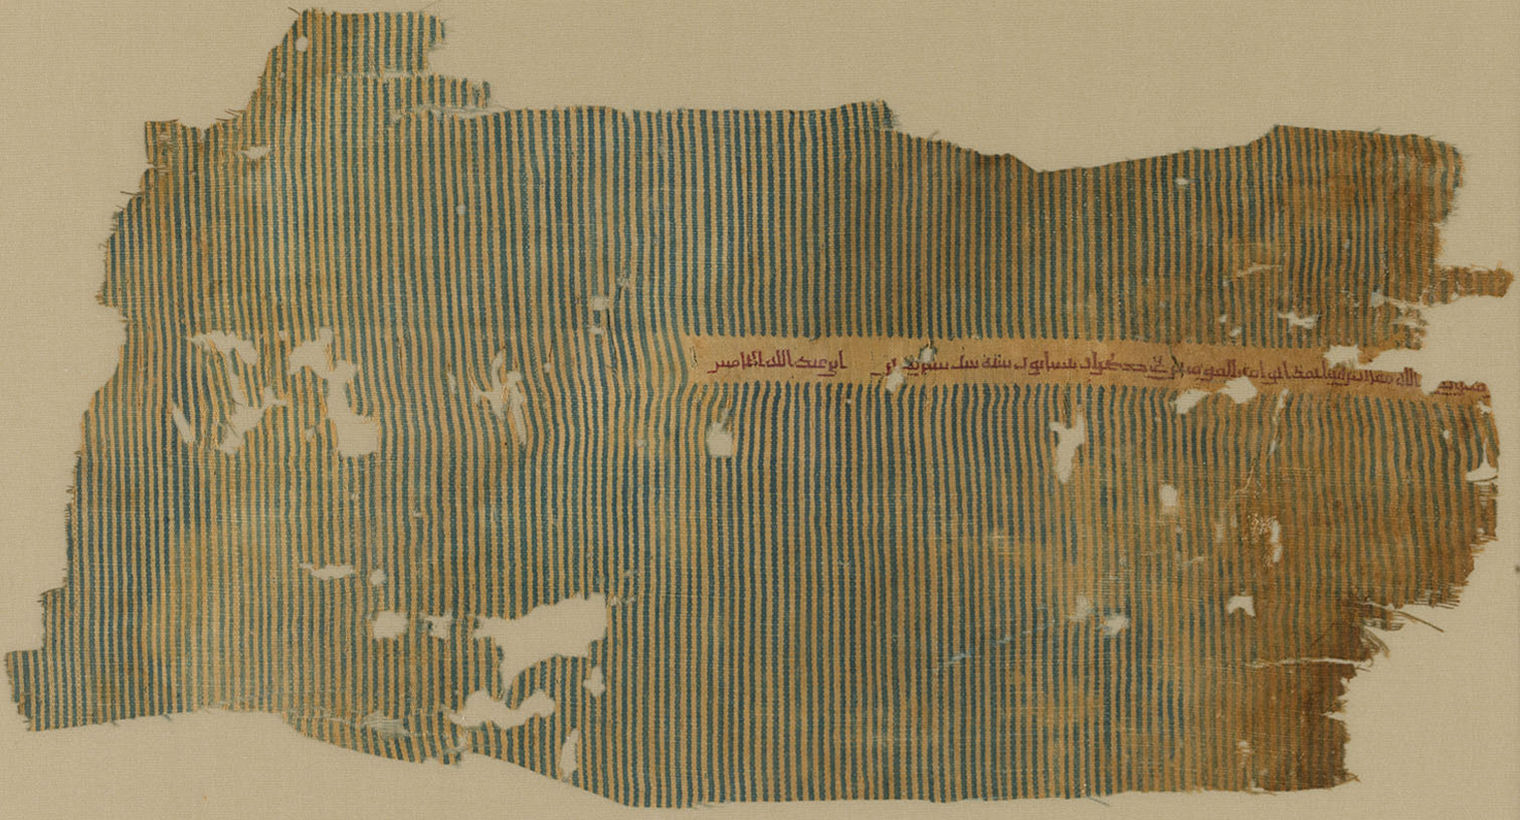 A silk and cotton tiraz textile fragment with thin vertical stripes and a thin line of embroidered red calligraphy on the right side of the textile